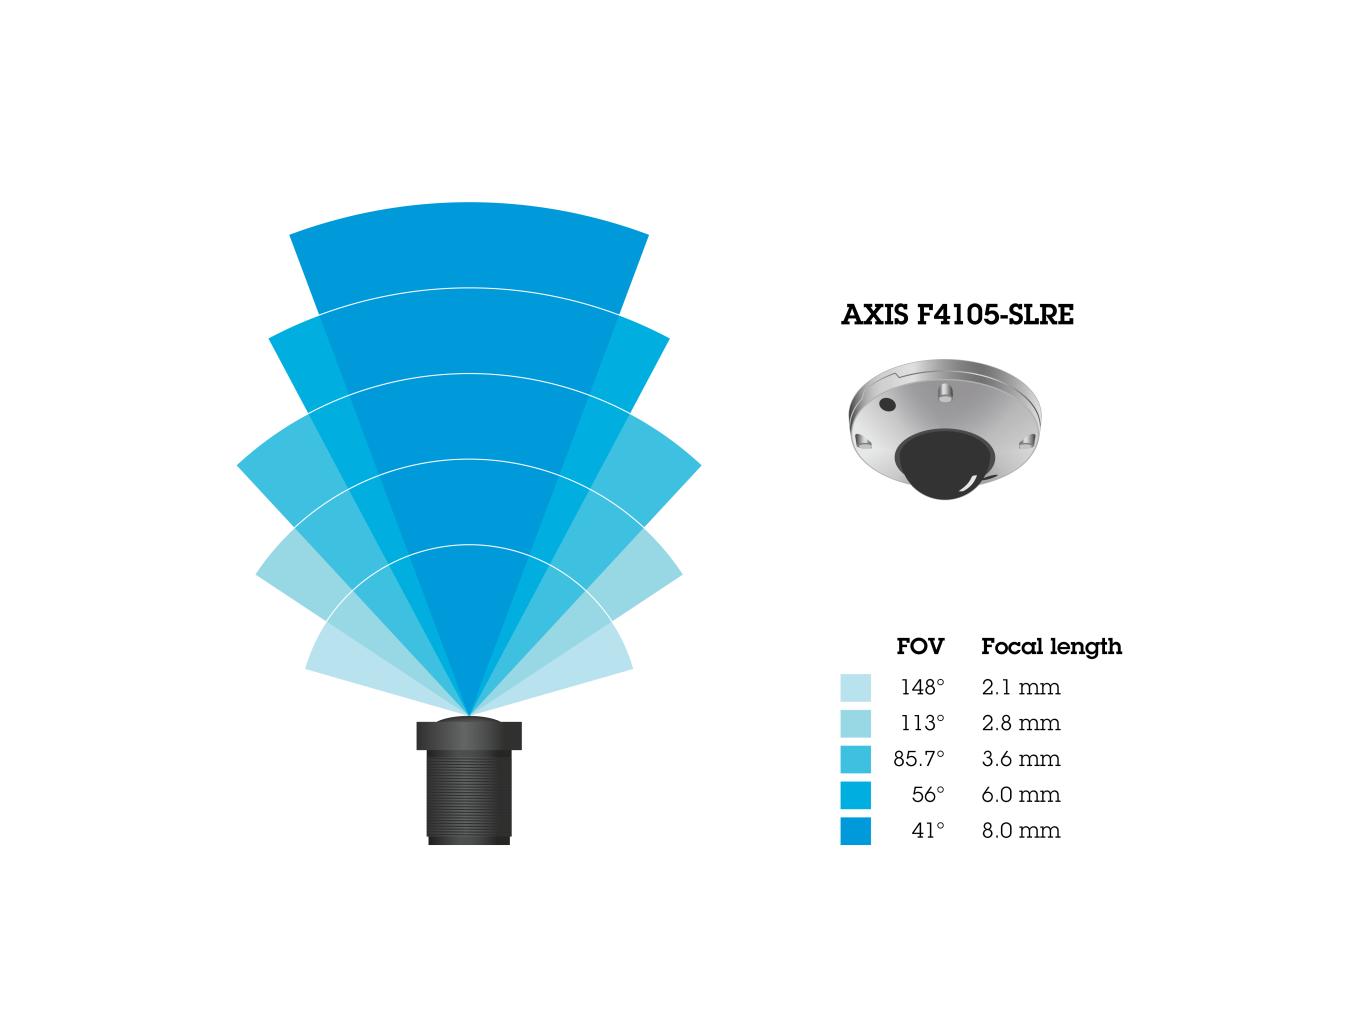 AXIS F4105-SLRE Lens Options